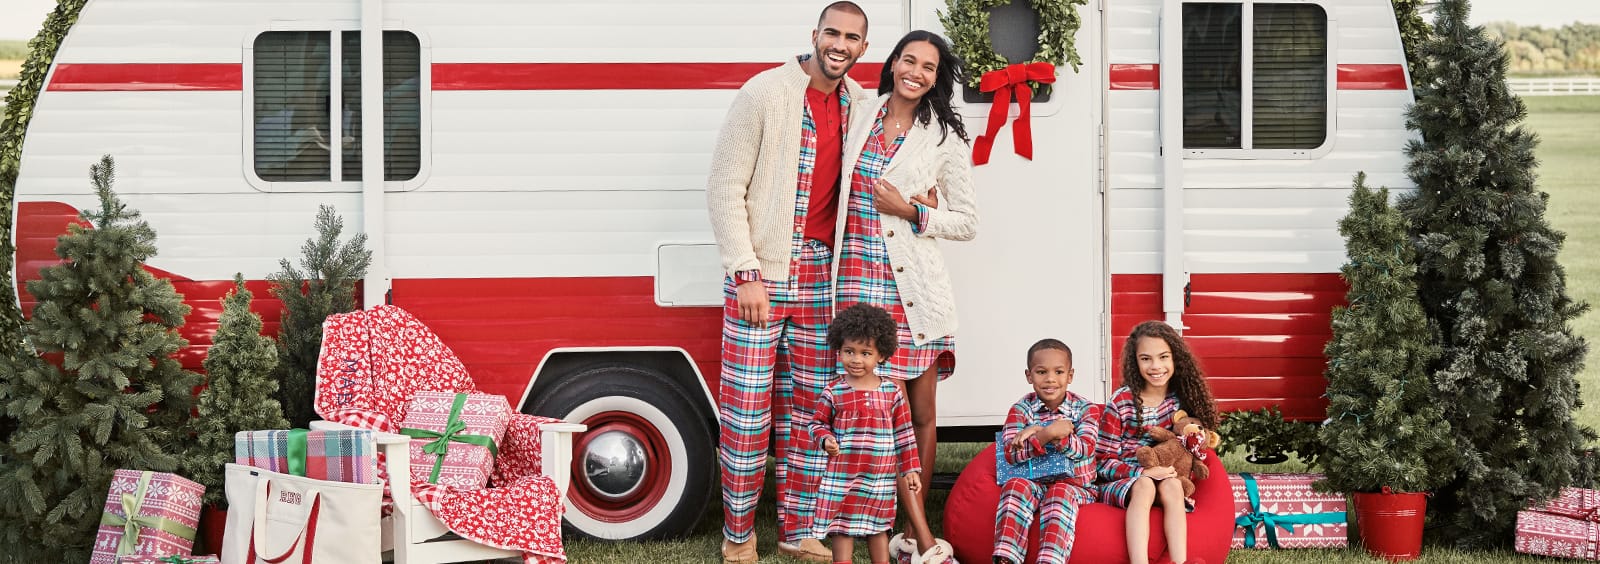 Matching Family Pajamas That Will Make Your Christmas Card a Hit | Lands' End